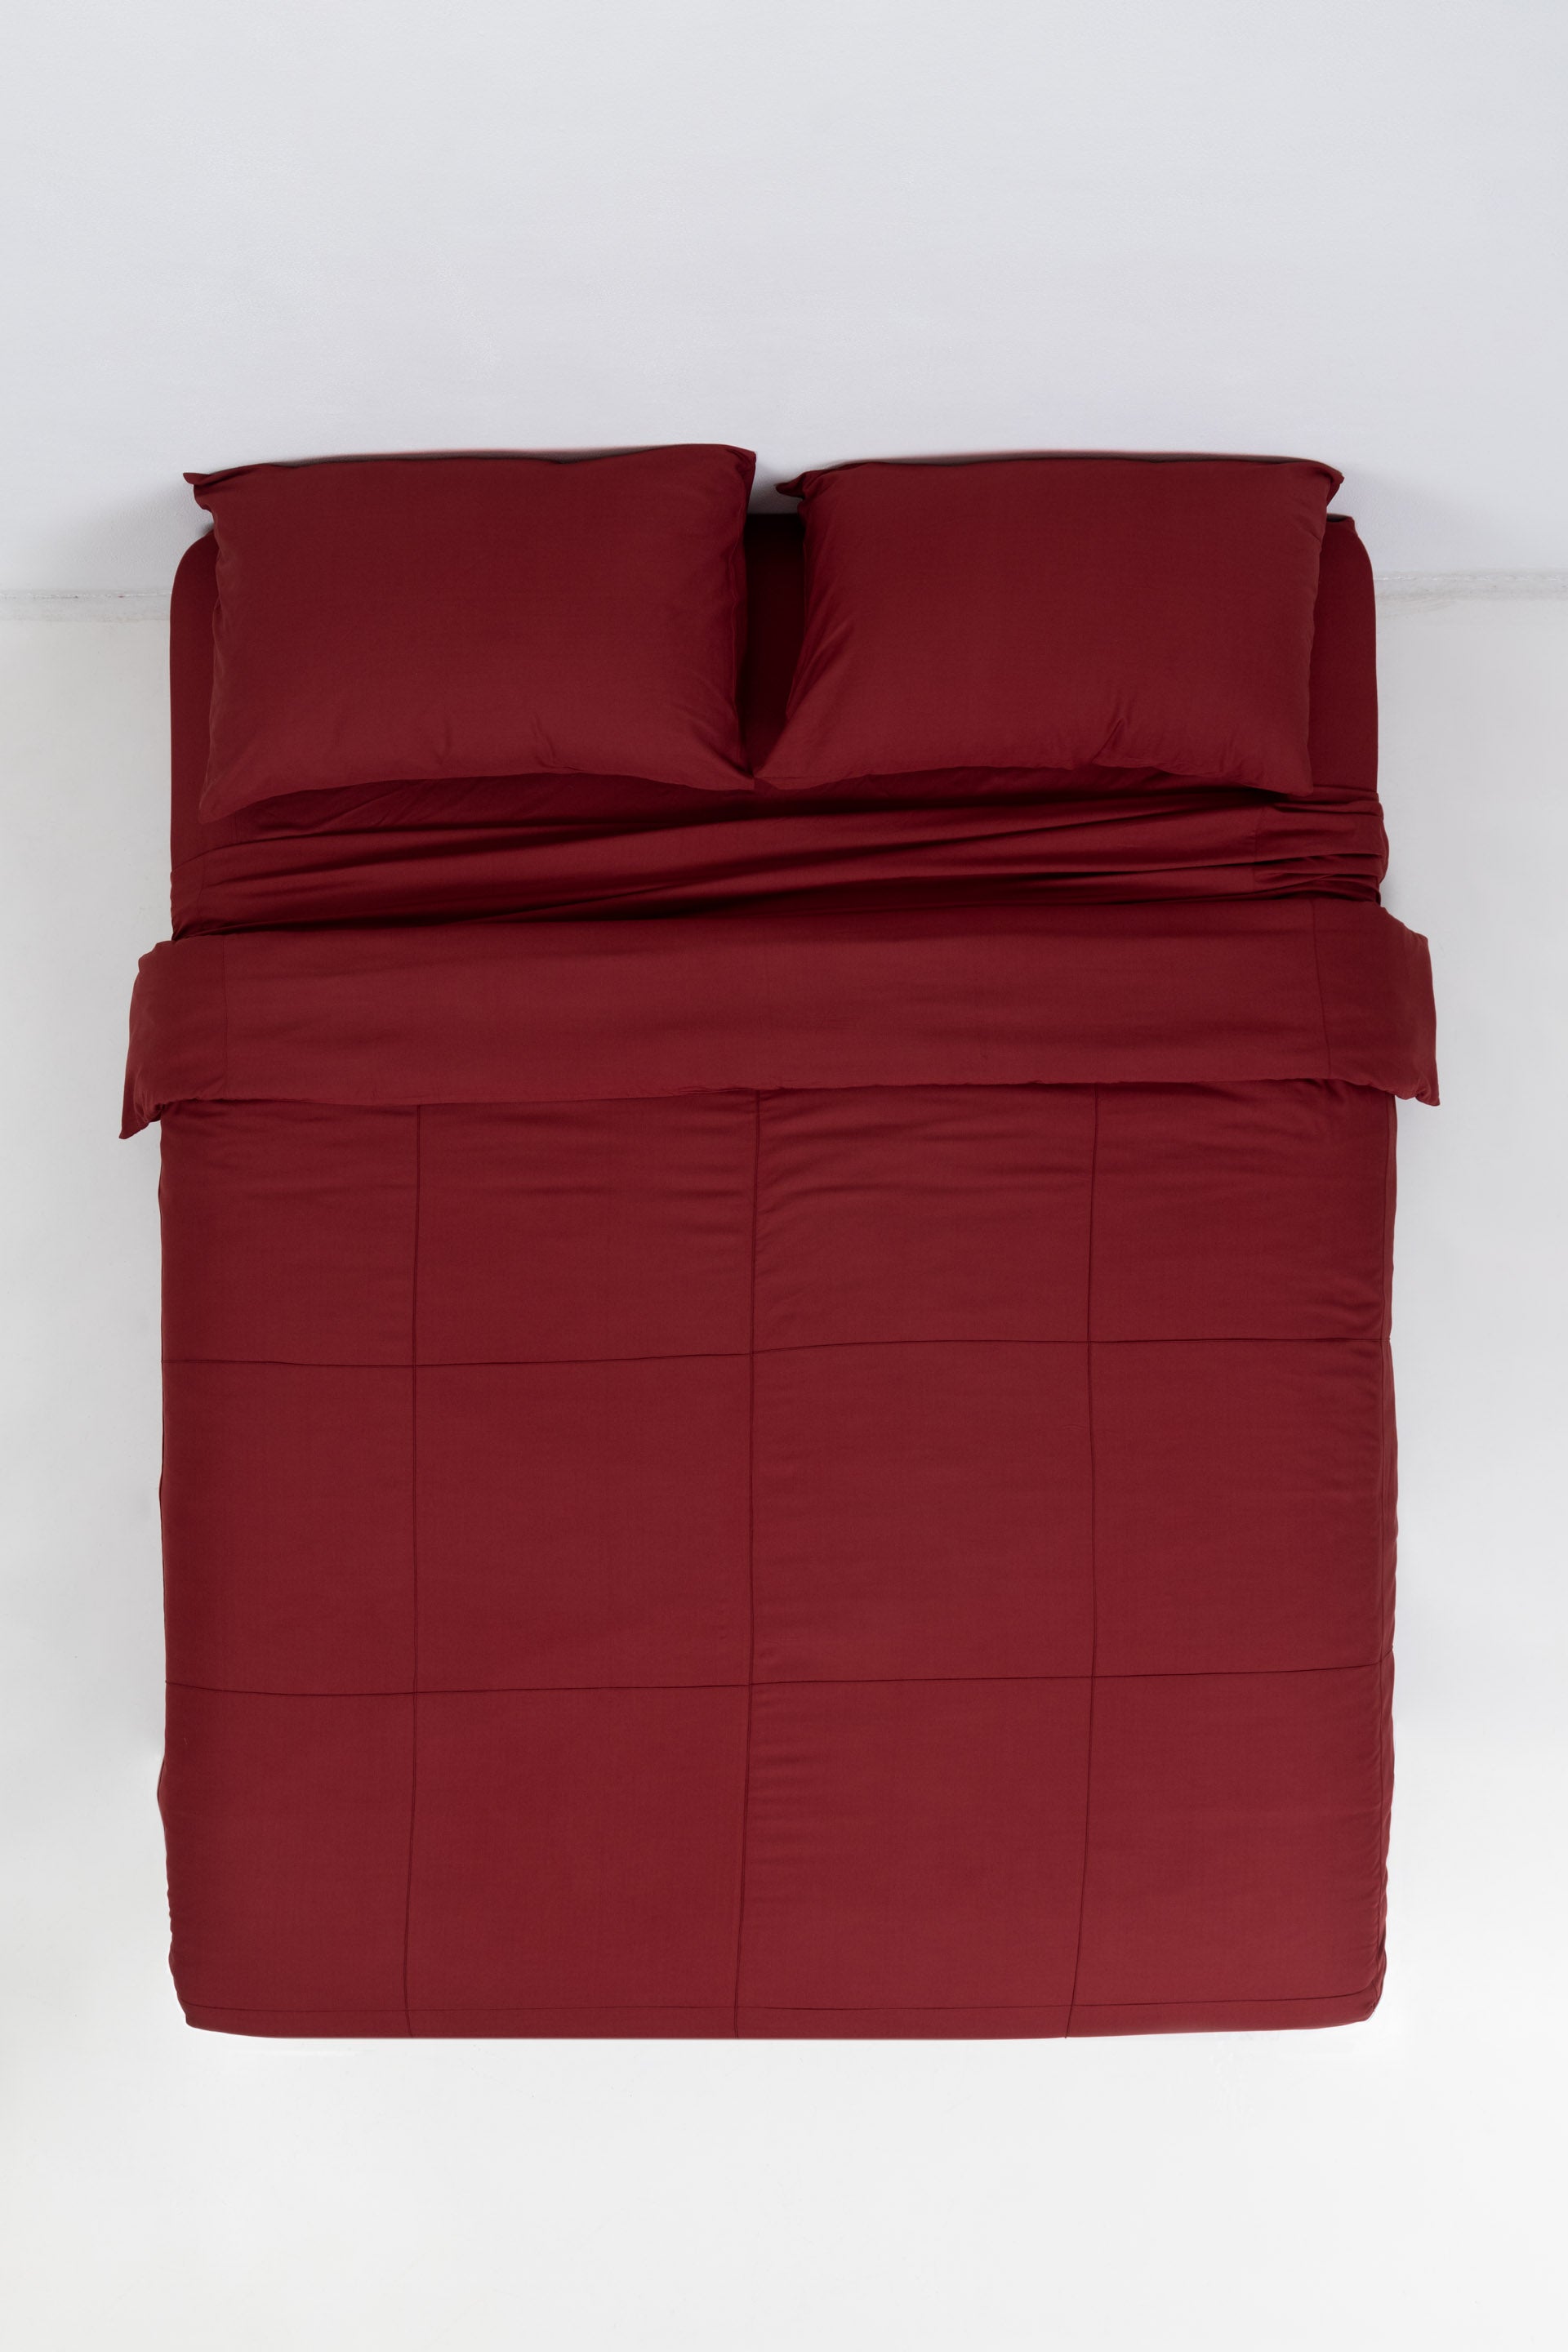 Ruby Quilt Cover Set